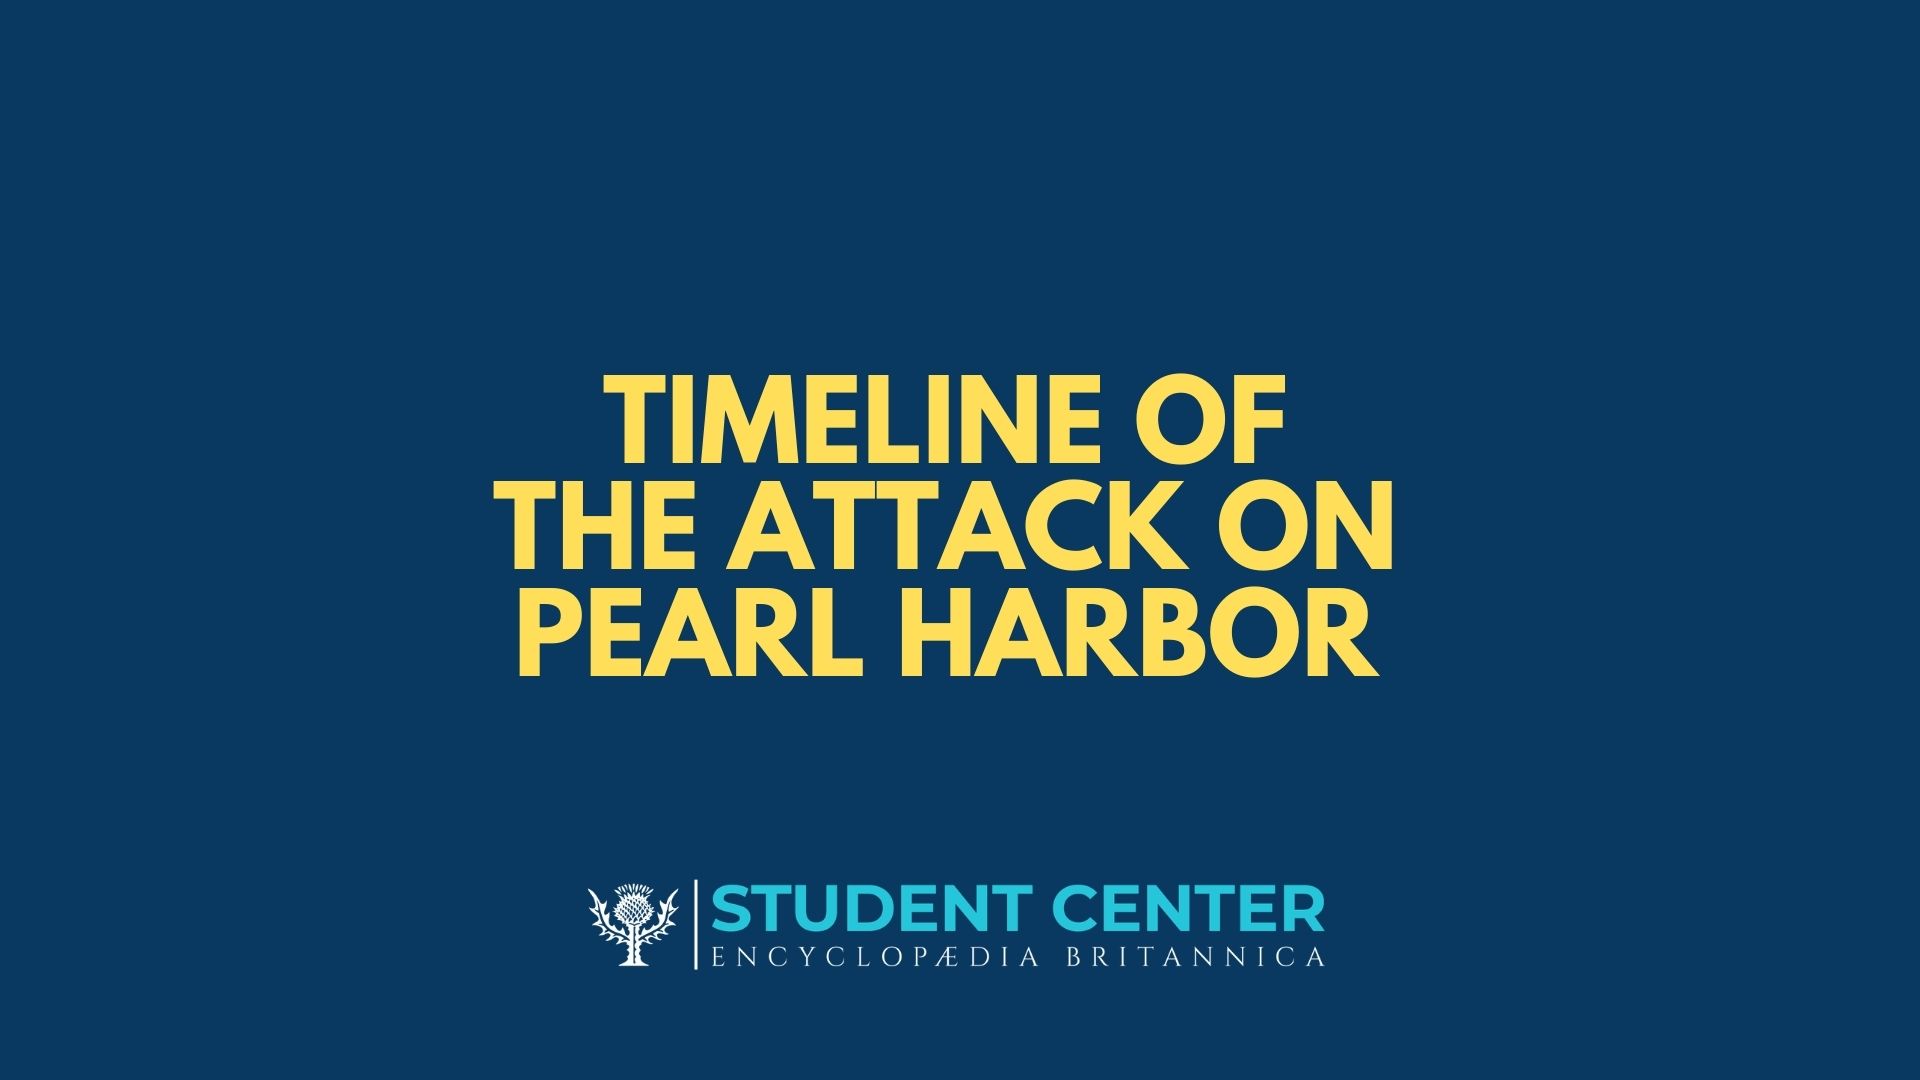 Timeline of the attack on Pearl Harbor